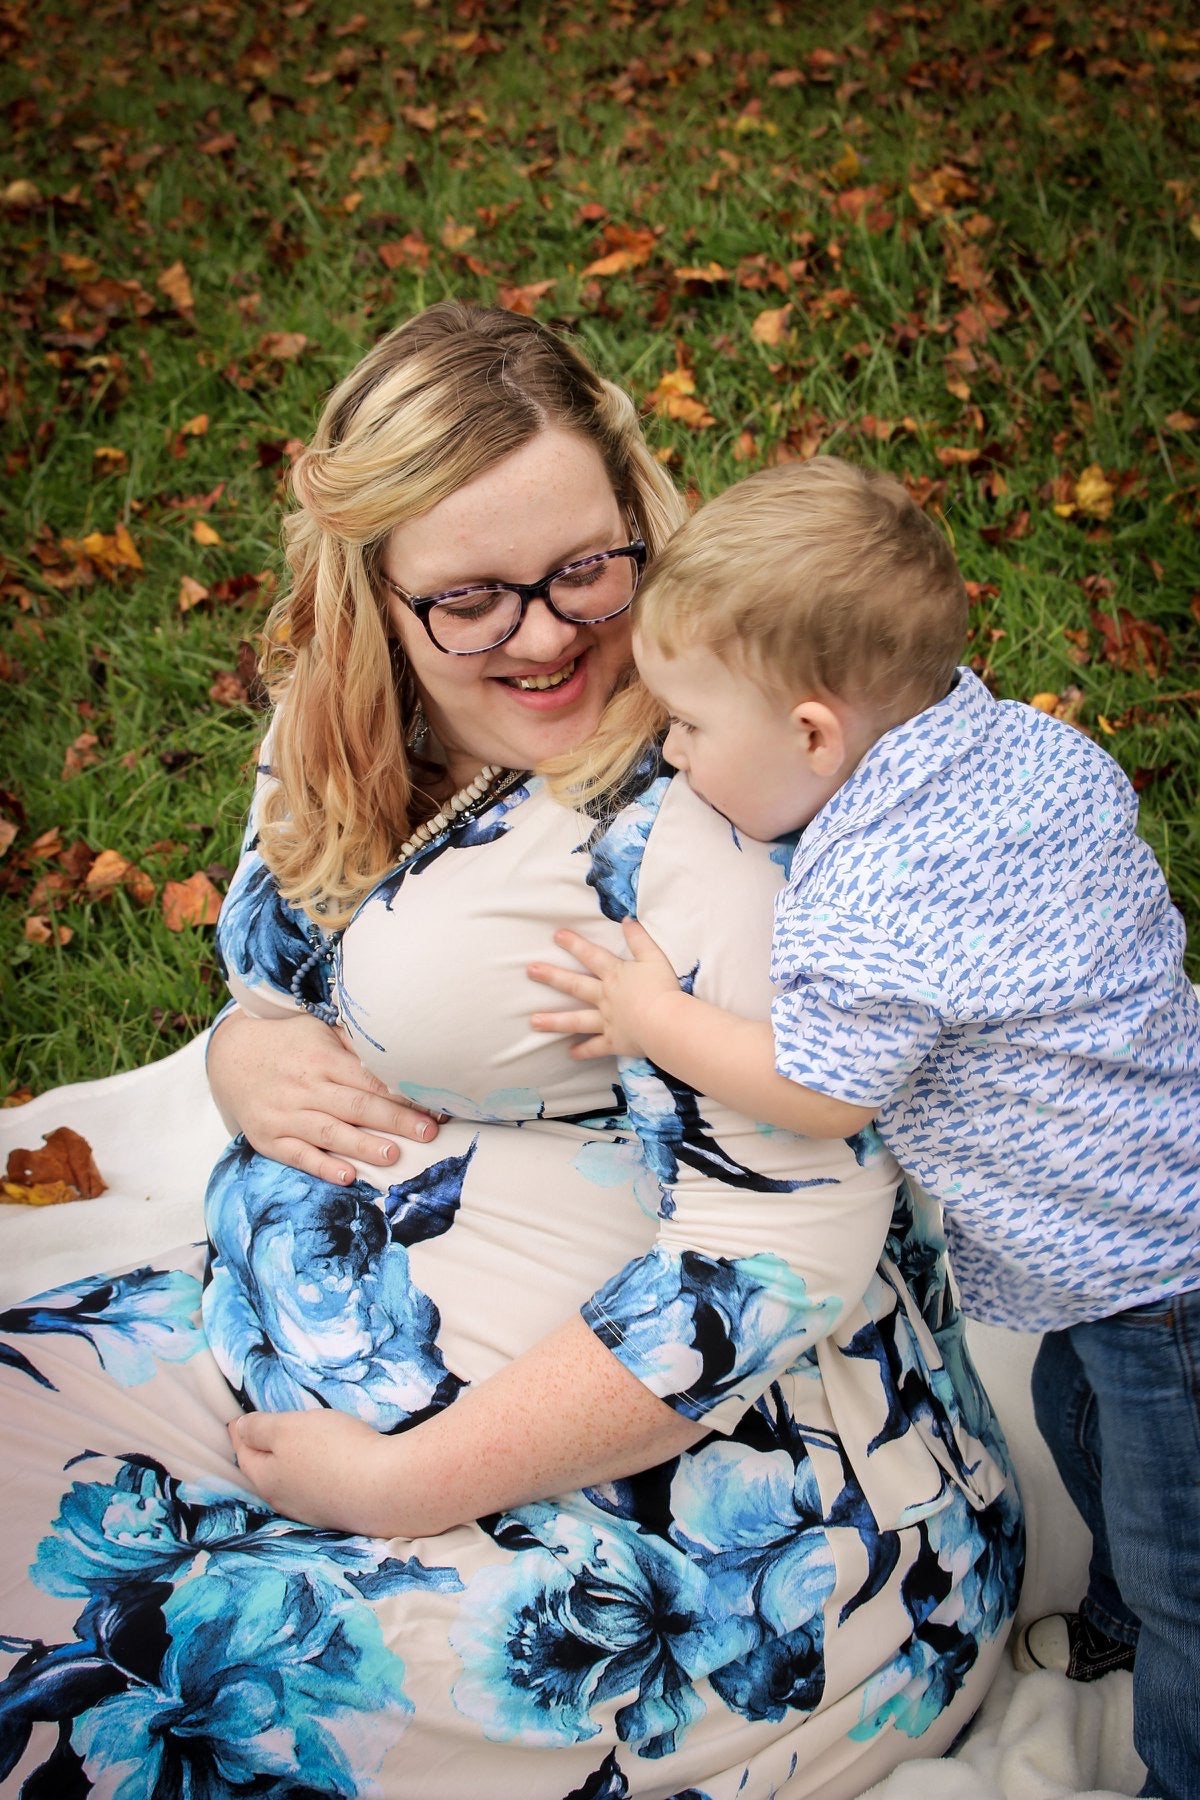 Christina Mace and Son Maternity Photo.jpg__PID:70a3be30-8661-4418-a310-ce2507d5c0ca